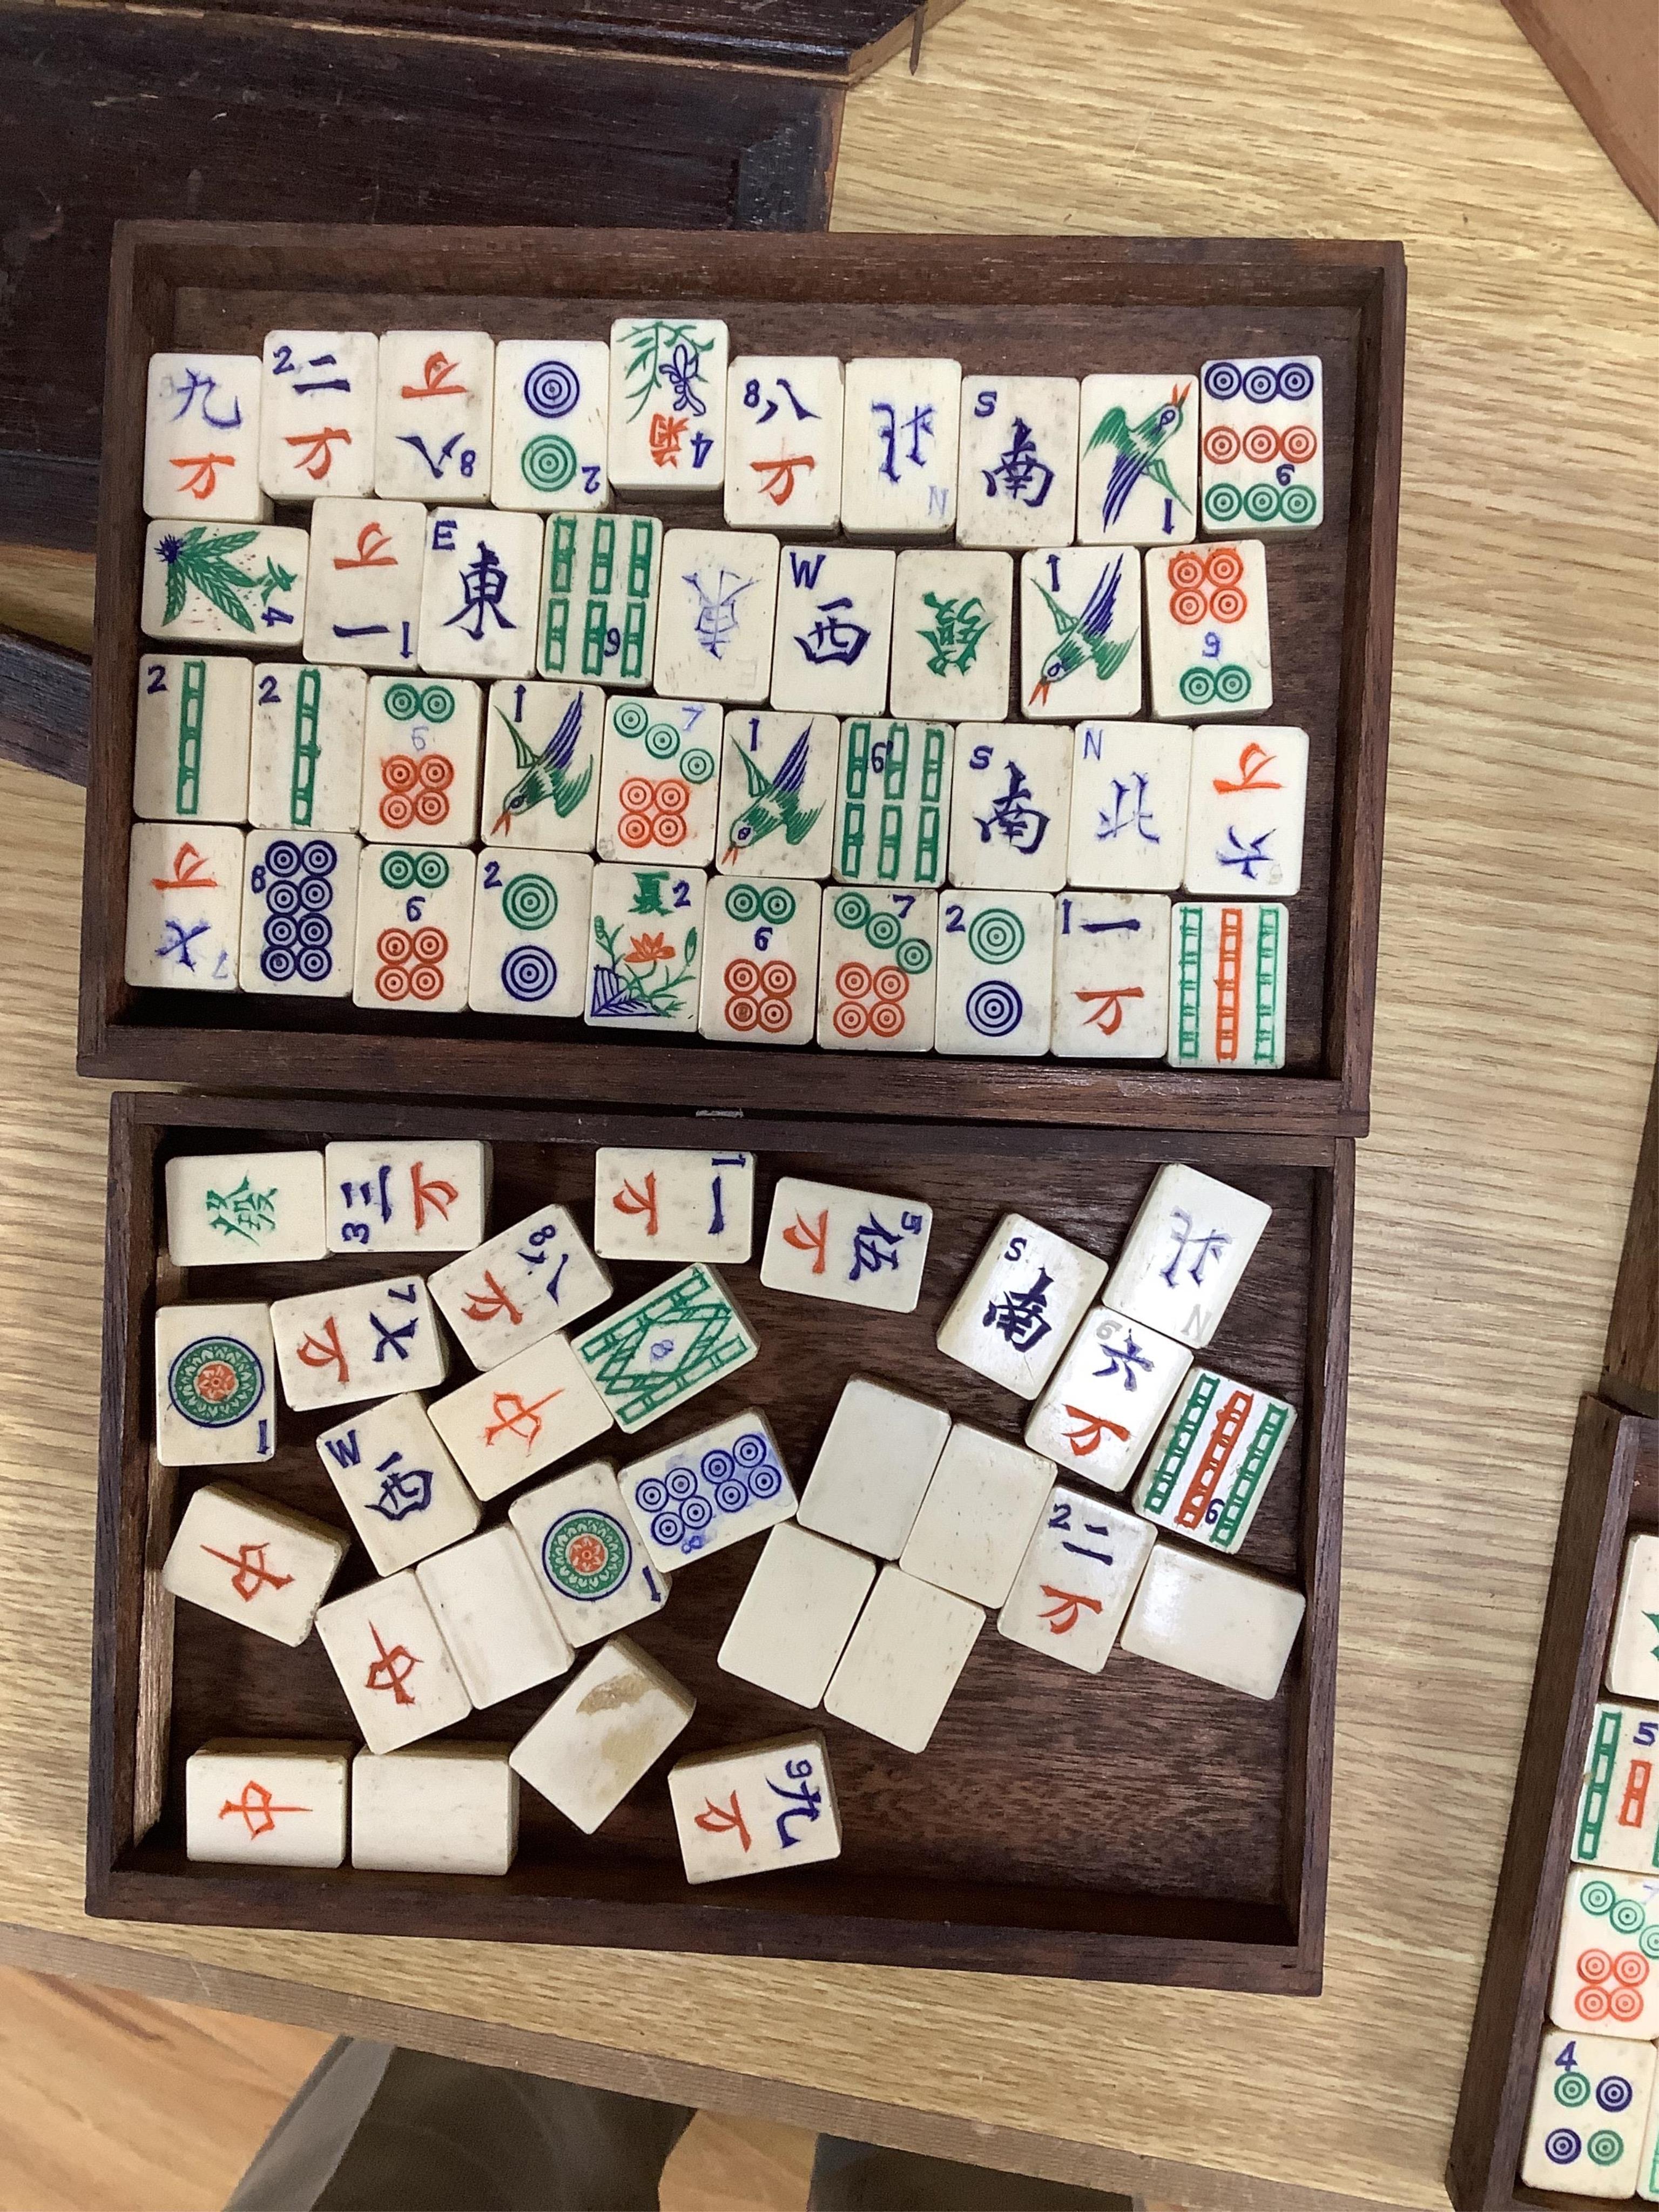 A cased Chinese Mahjong set, bone pieces